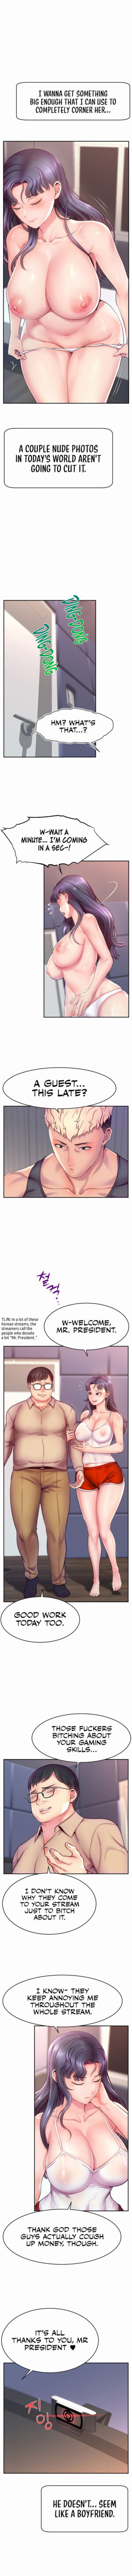 [Ohhhhhk, Boss Racoon] Making Friends With Streamers by Hacking! (1-16) [English] [Omega Scans] [Ongoing]